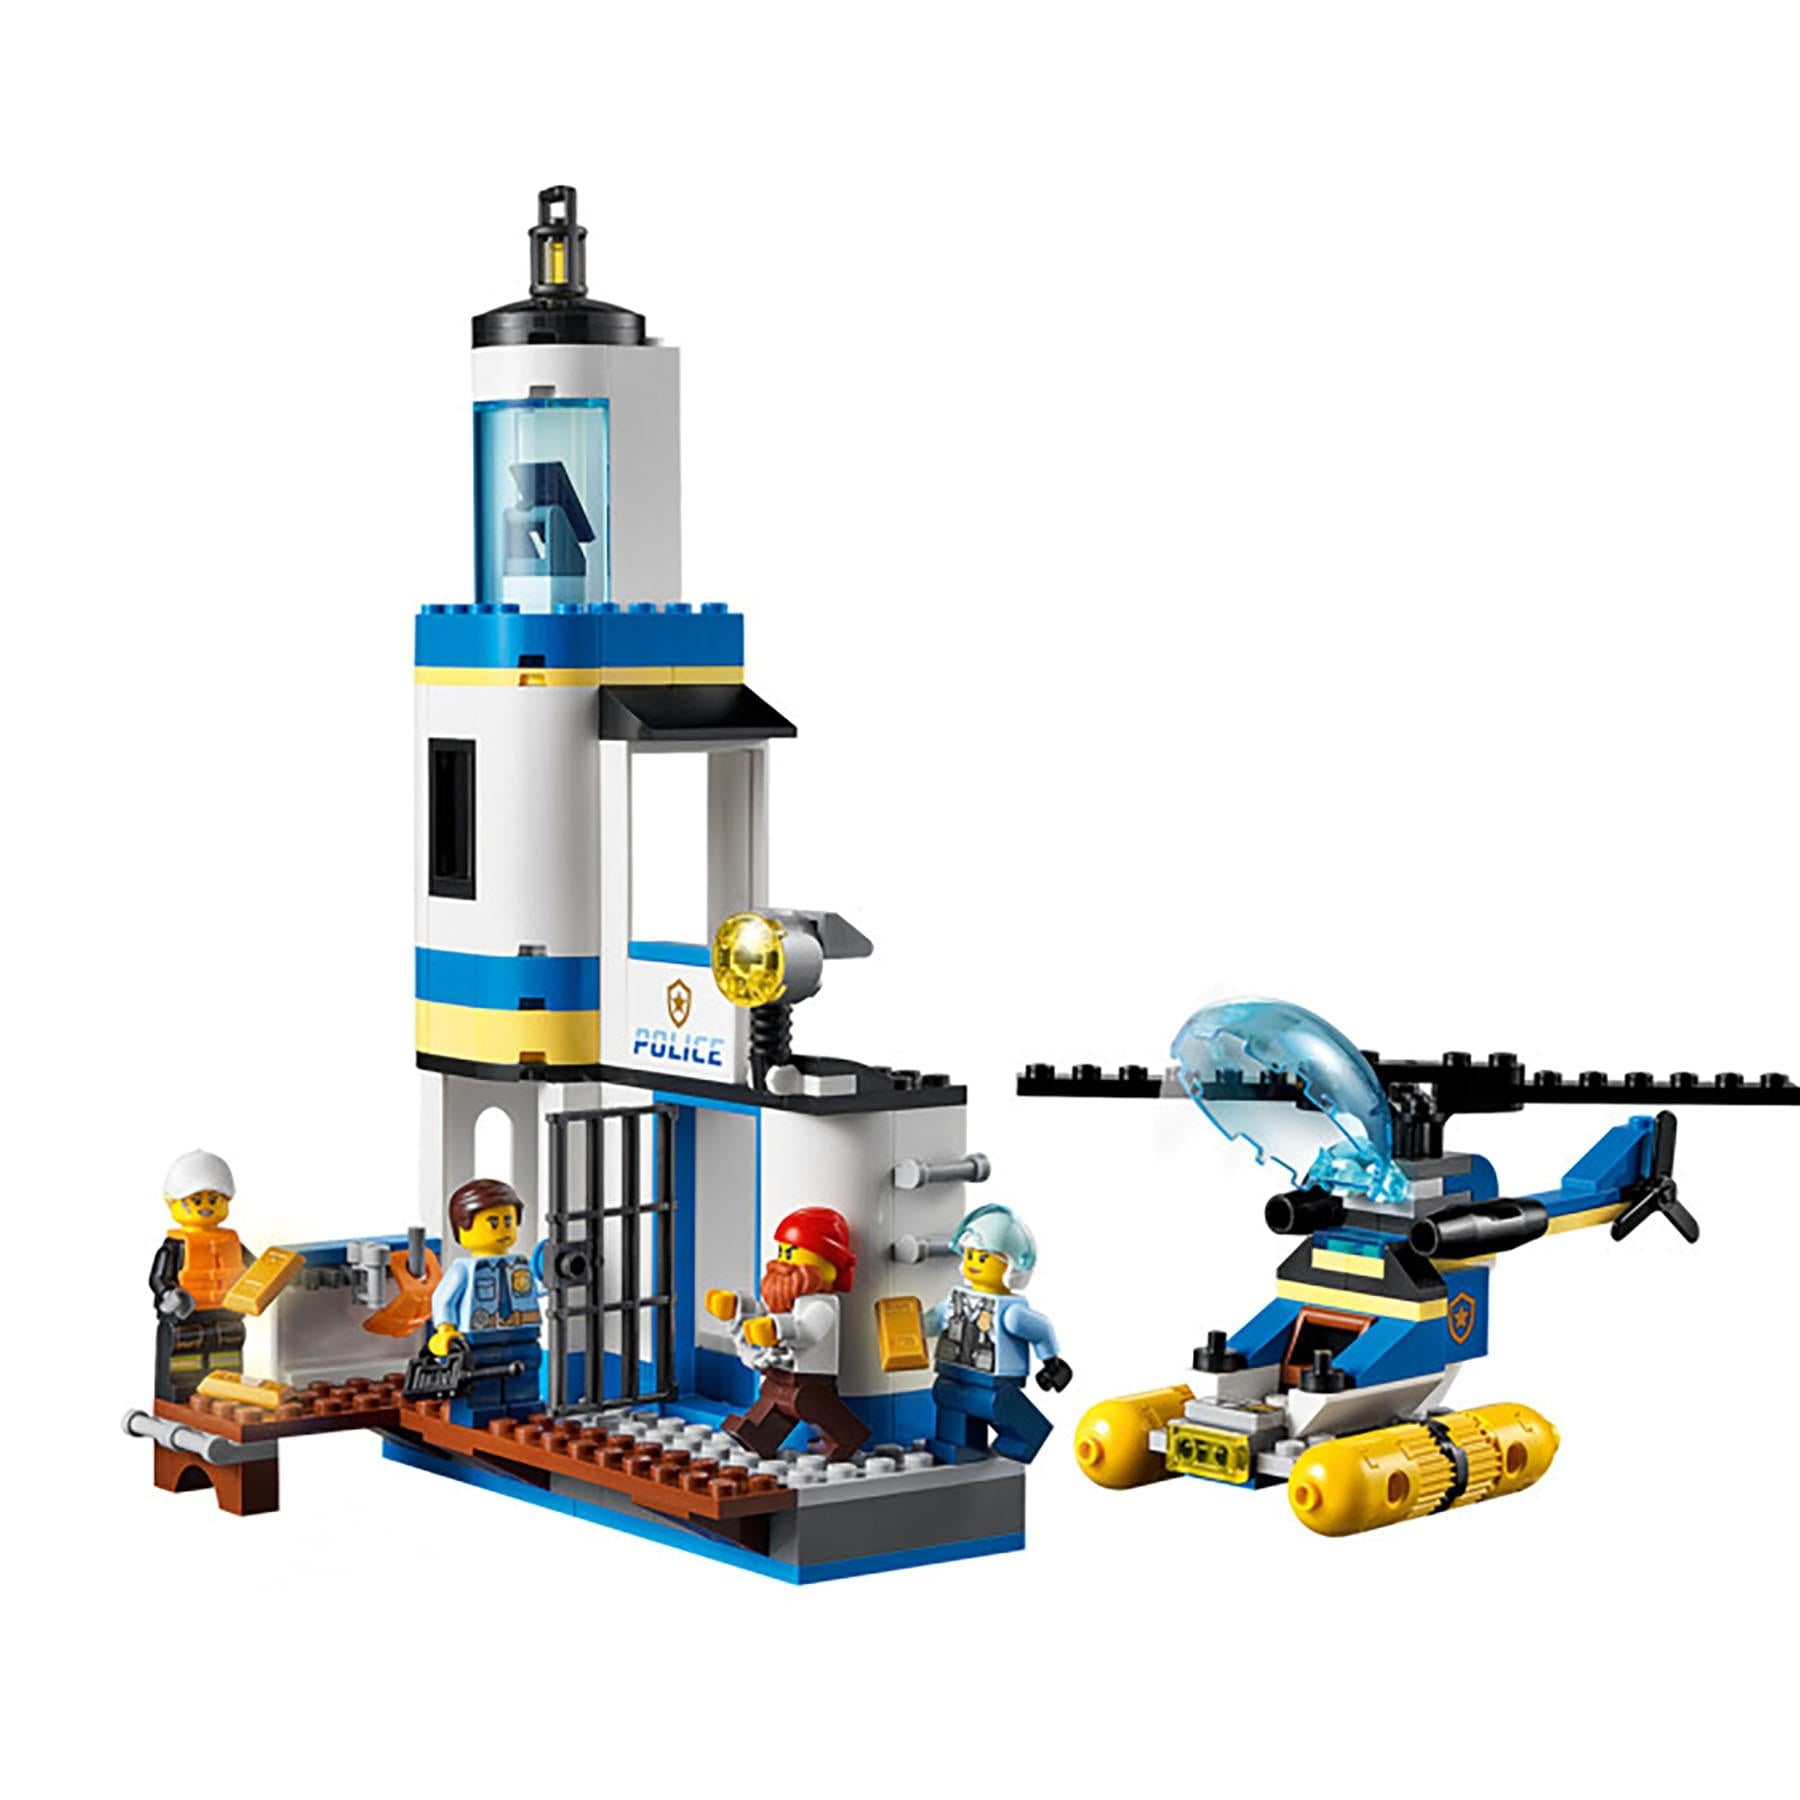 LEGO City 60308 Seaside Police and Fire Mission 297 Piece Building Kit